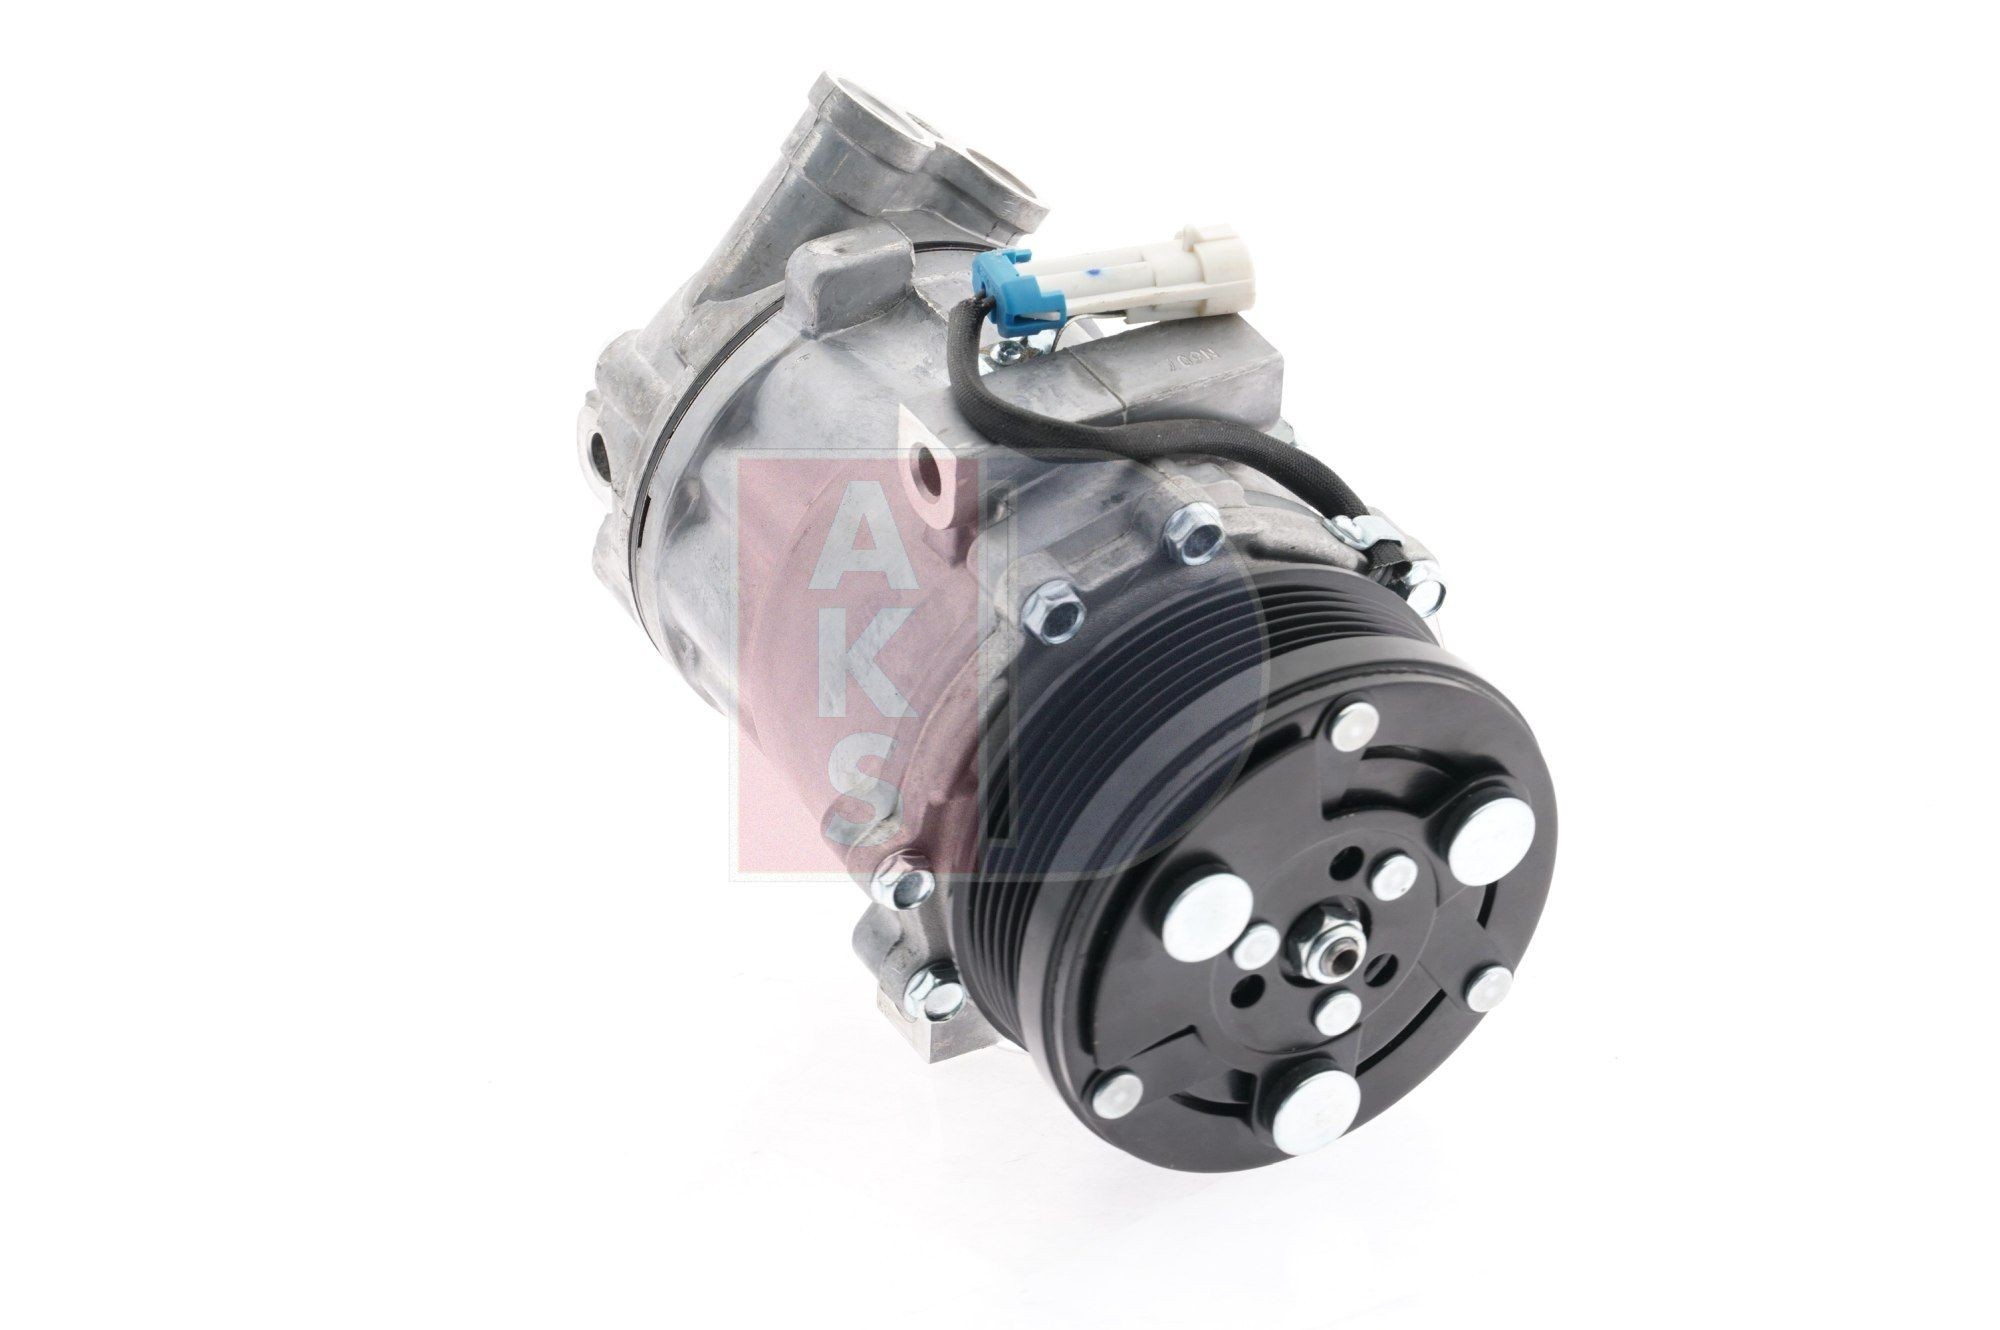 Air conditioning compressor 850898N from AKS DASIS